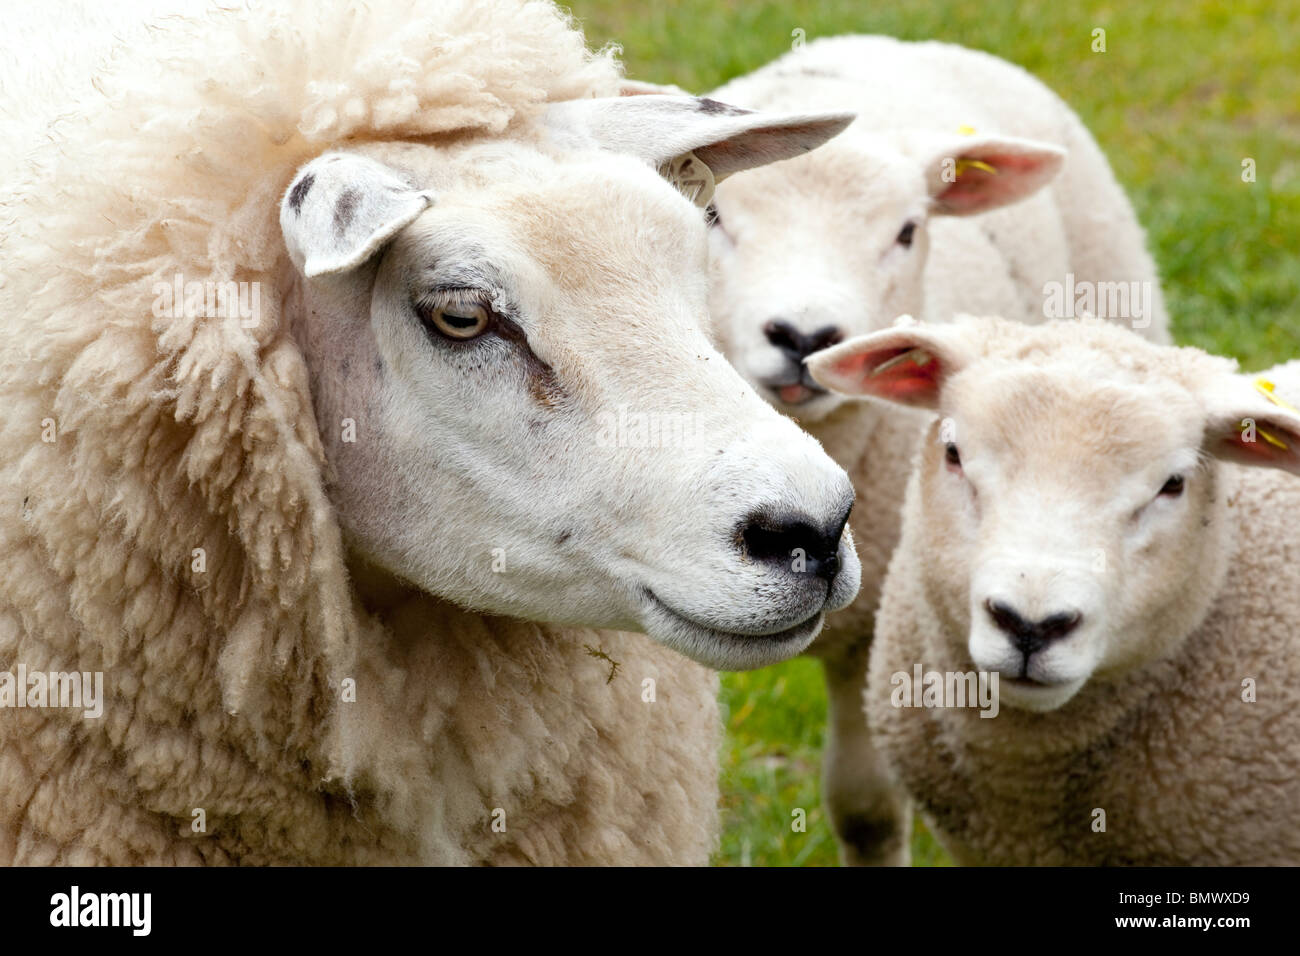 Agriculture livestock sheep mum with two spring lambs children Dumfries and Galloway Scotland UK Stock Photo